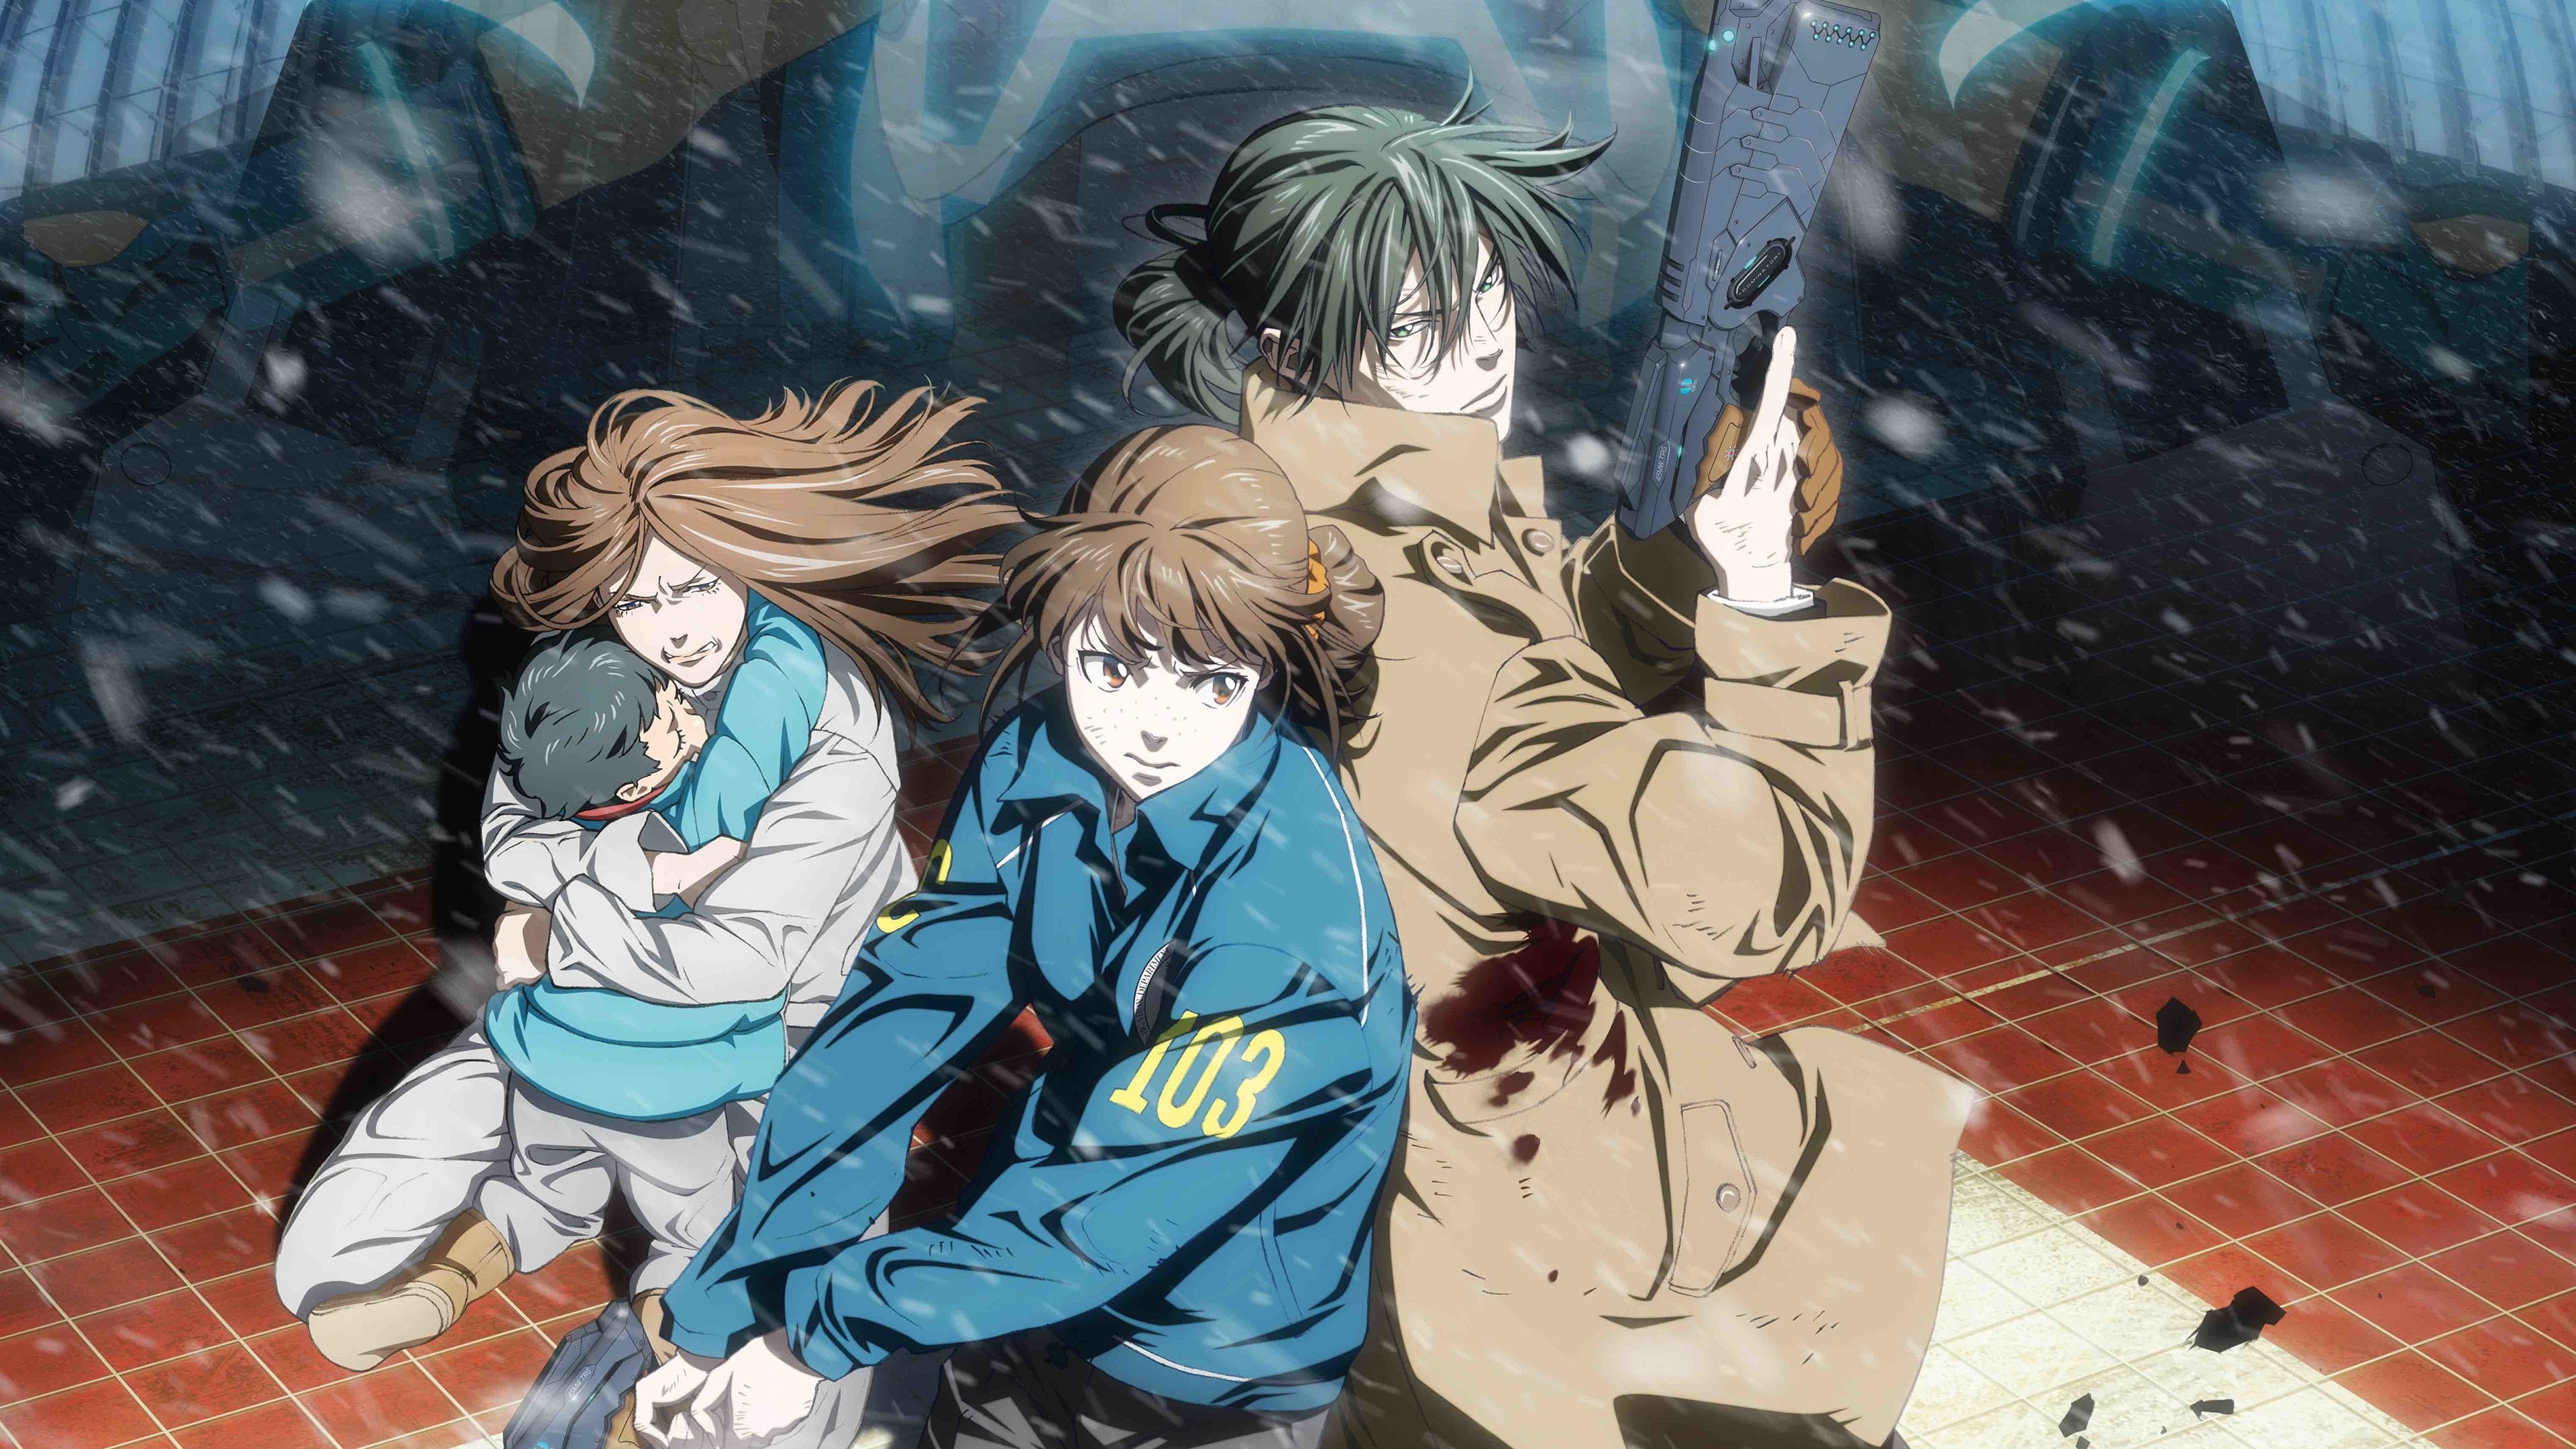 Psycho-Pass: Sinners of the System – Case.1 Crime and Punishment 2019 123movies